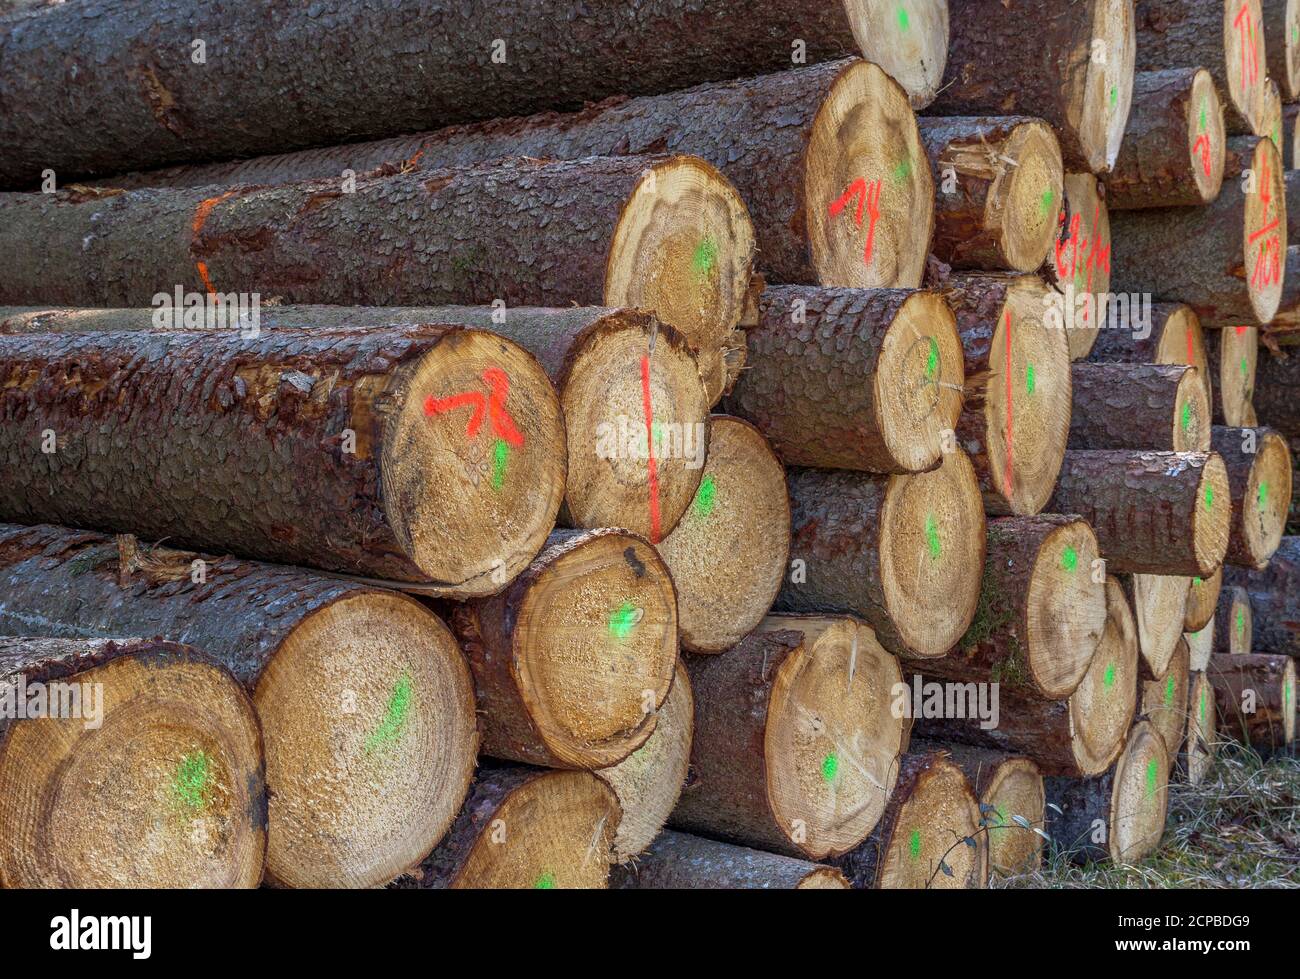 Timber industry, stacked tree trunks, Bavaria, Germany, Europe Stock Photo